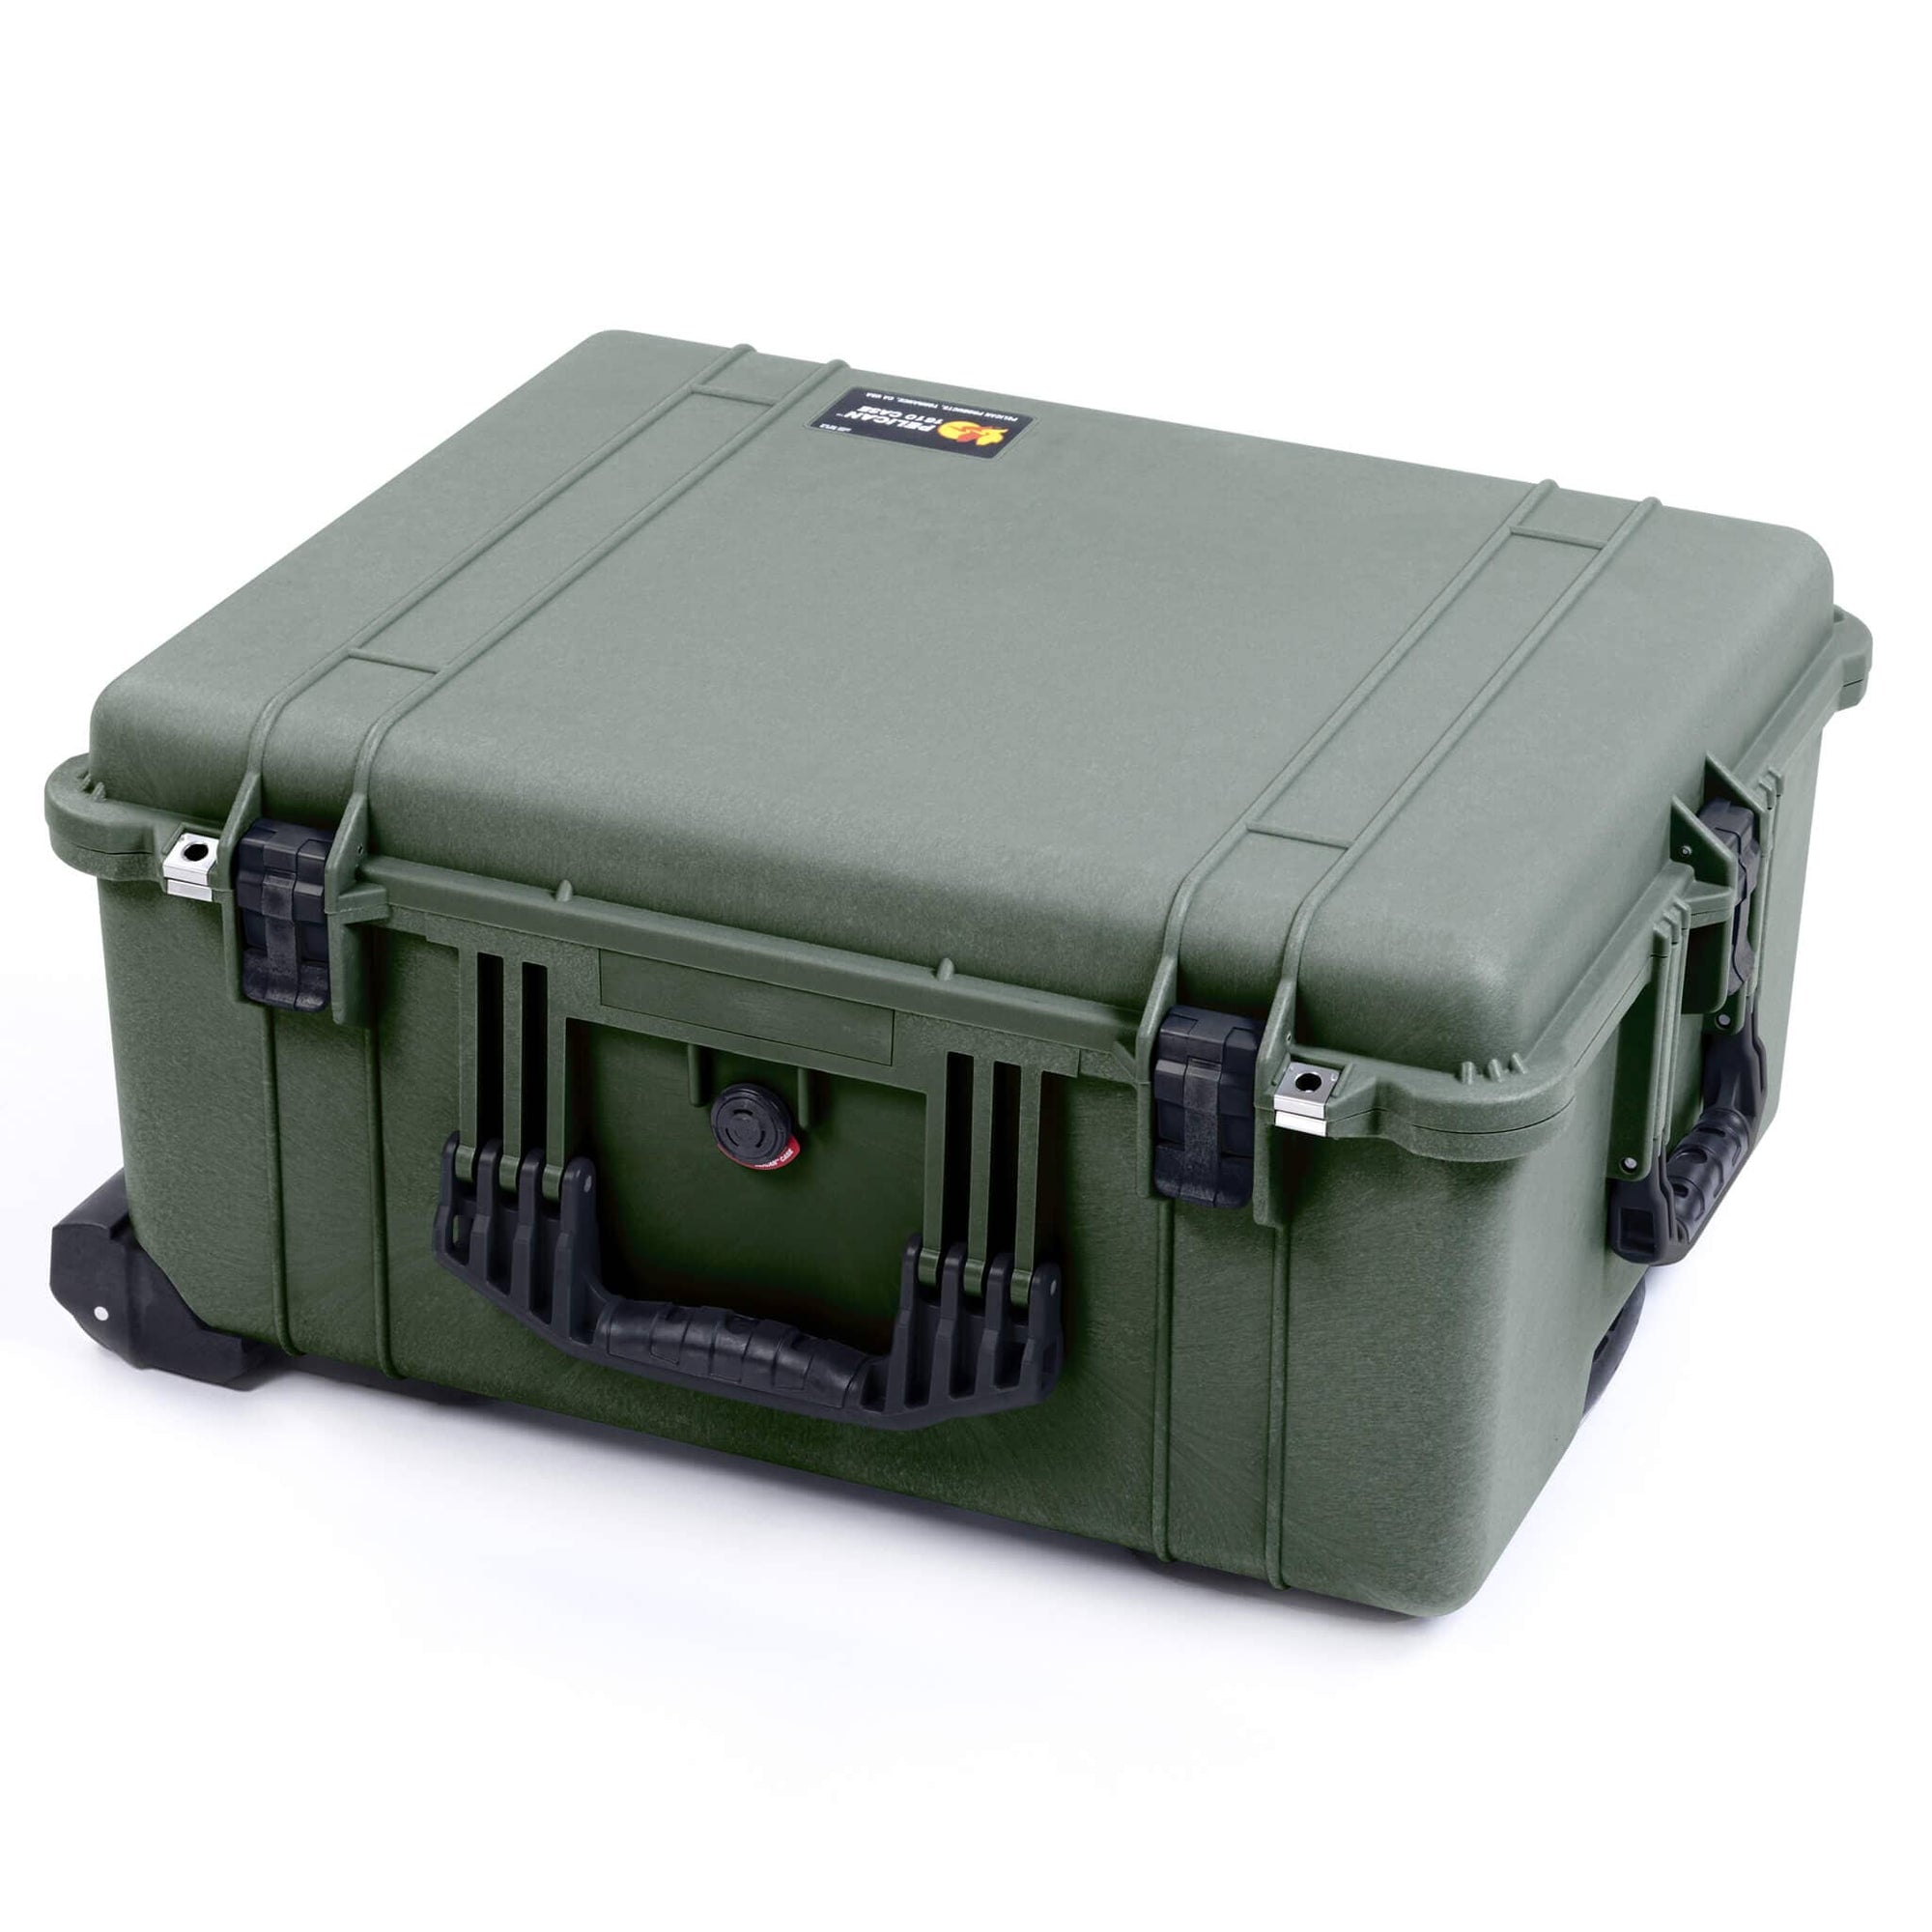 Pelican 1610 Case, OD Green with Black Handles and Latches ColorCase 